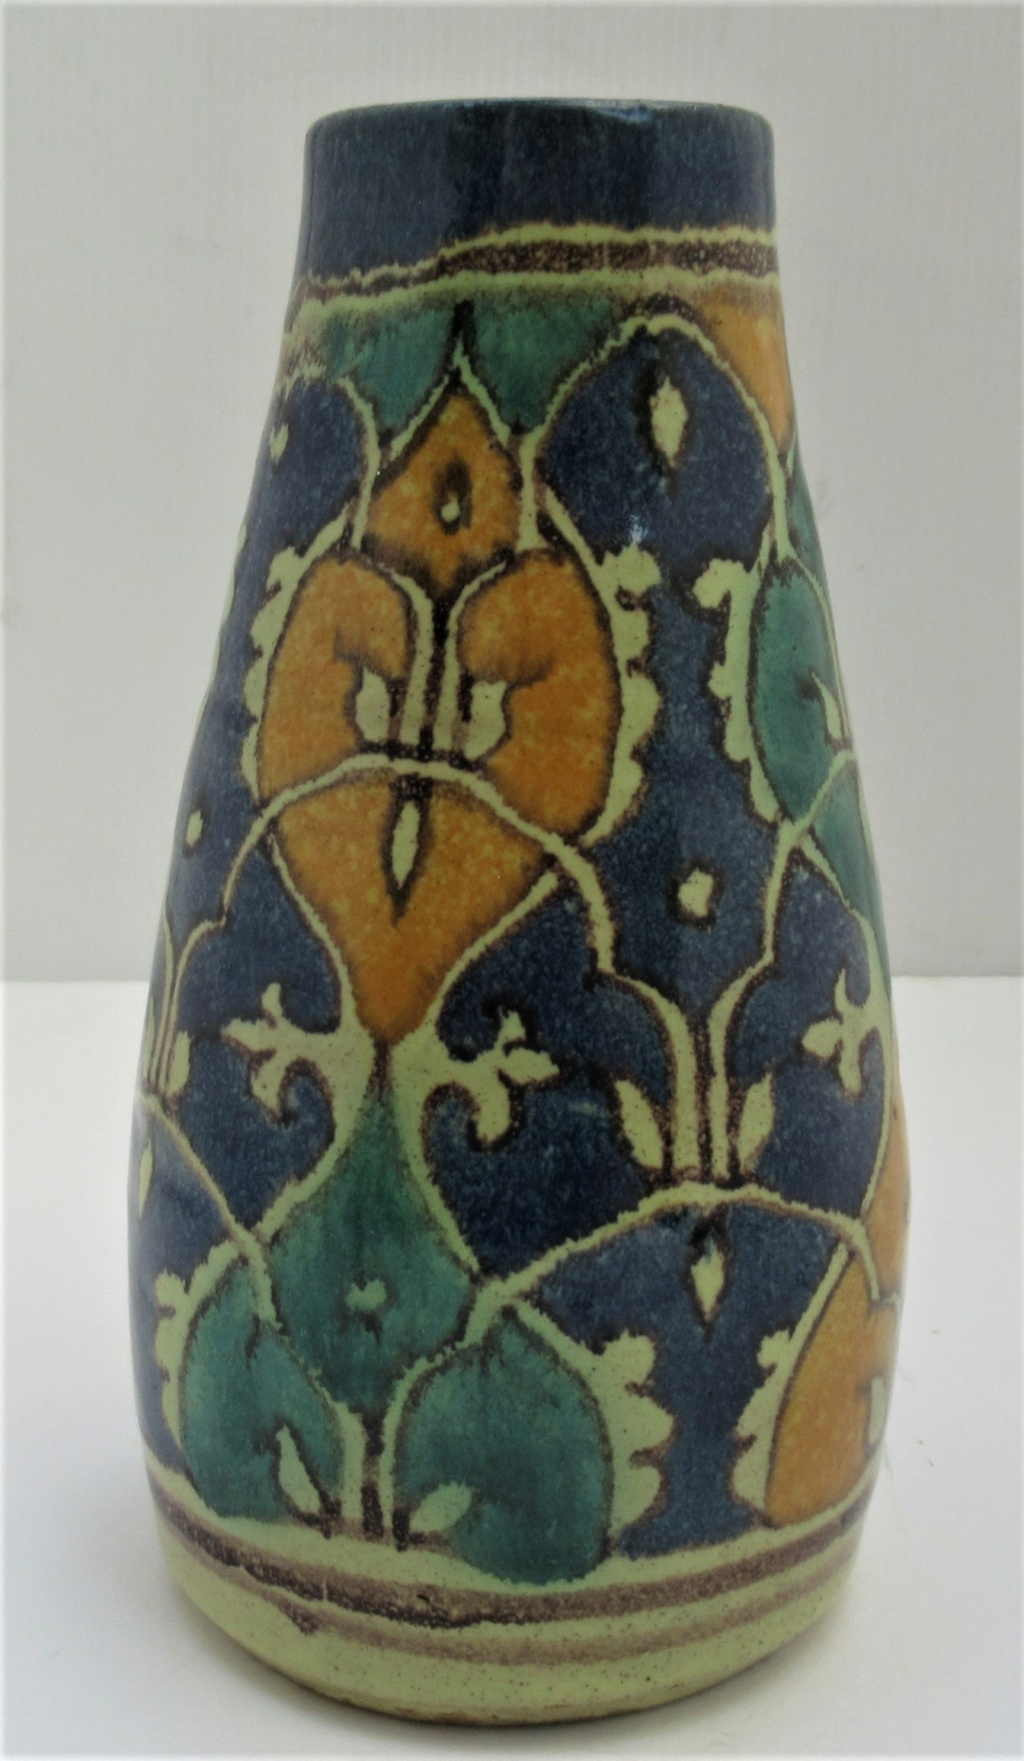 ART POTTERY VASE WITH INDISTINCT MARKS - ENGLISH DUTCH OR PERSIAN? Art_po10